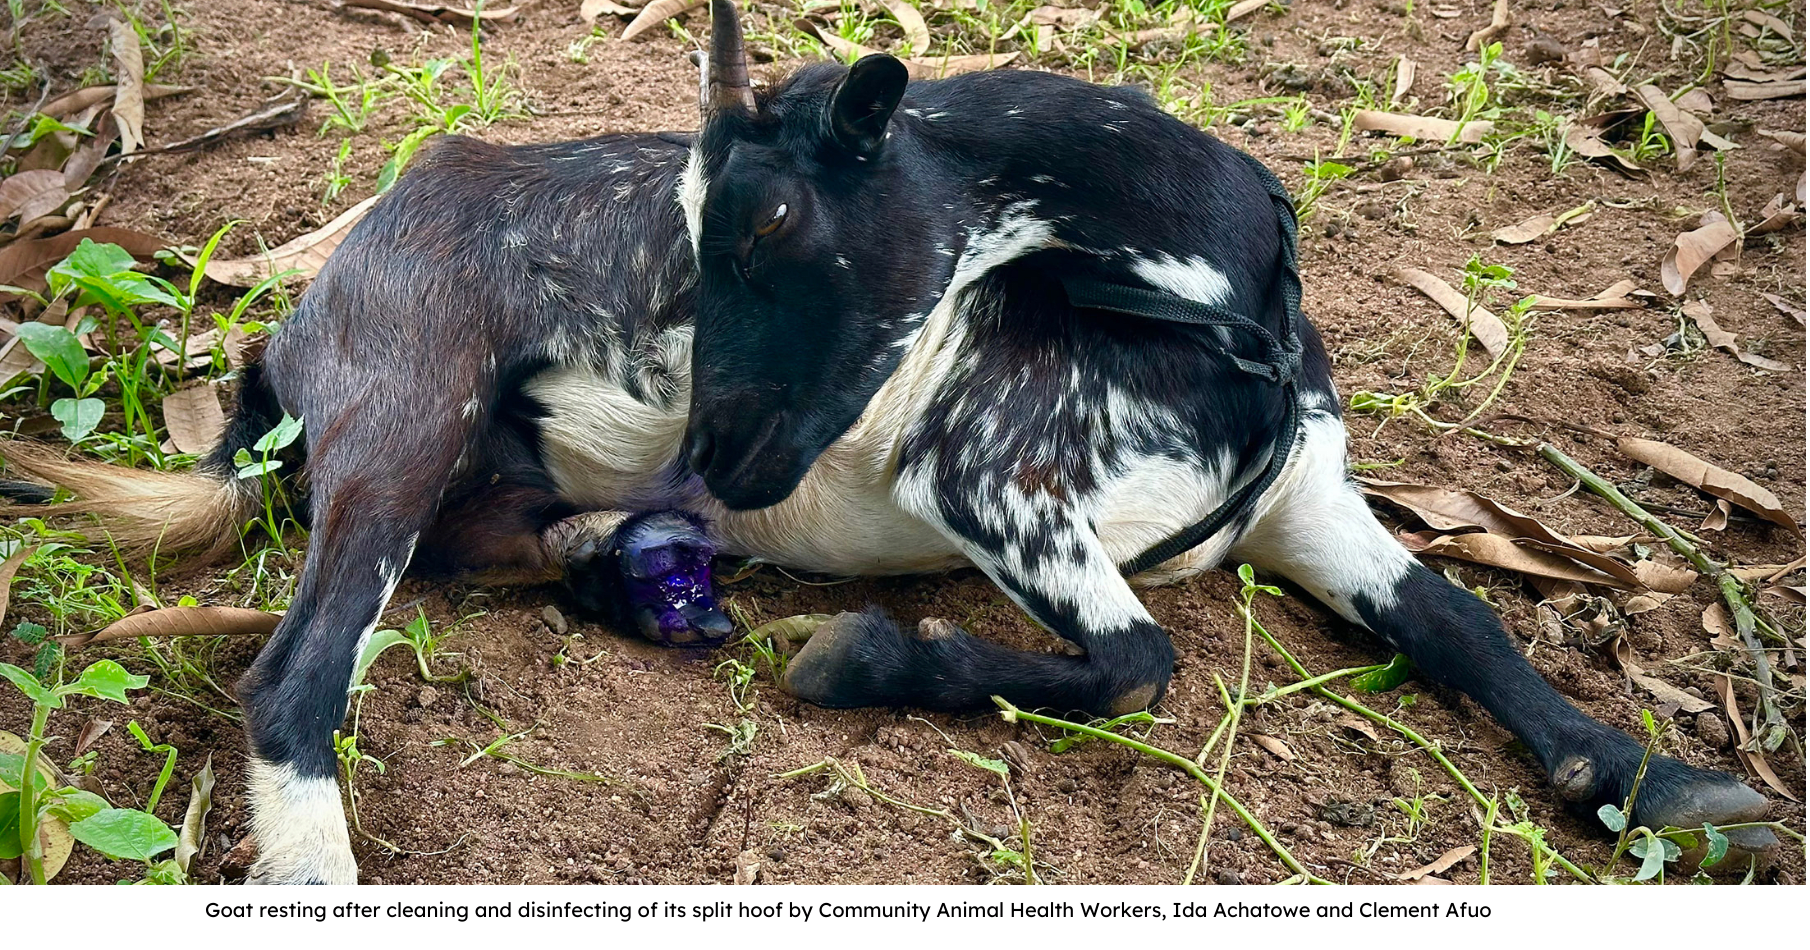 image of goat in Ghana resting after having foot cleaned and disinfected